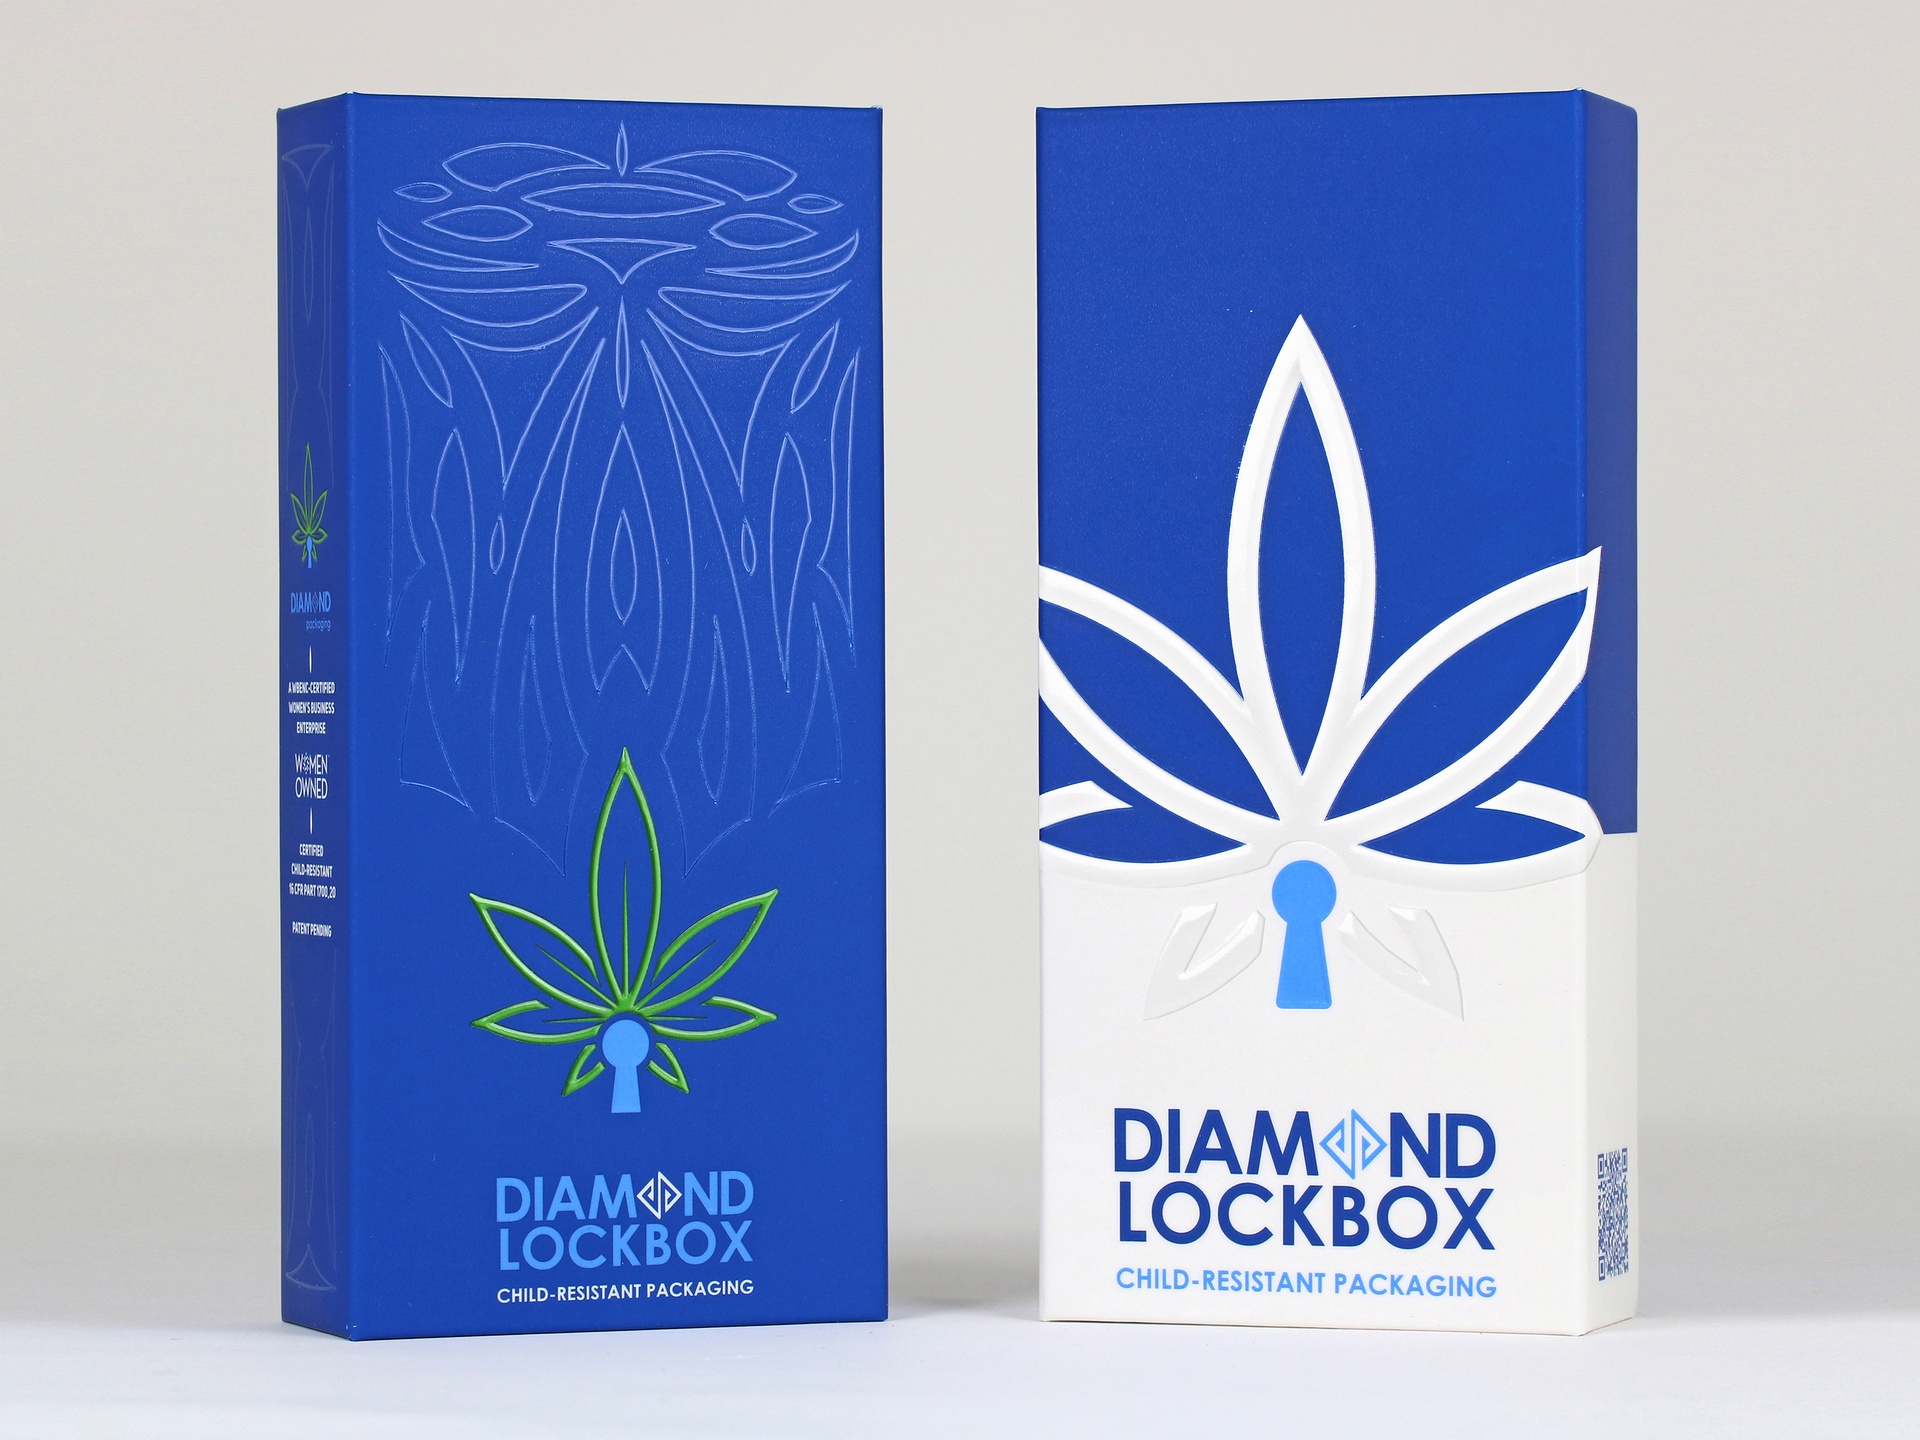 Diamond's award-winning Lockbox® folding cartons are an upscale, CR-certified packaging solution for medical or recreational marijuana products.